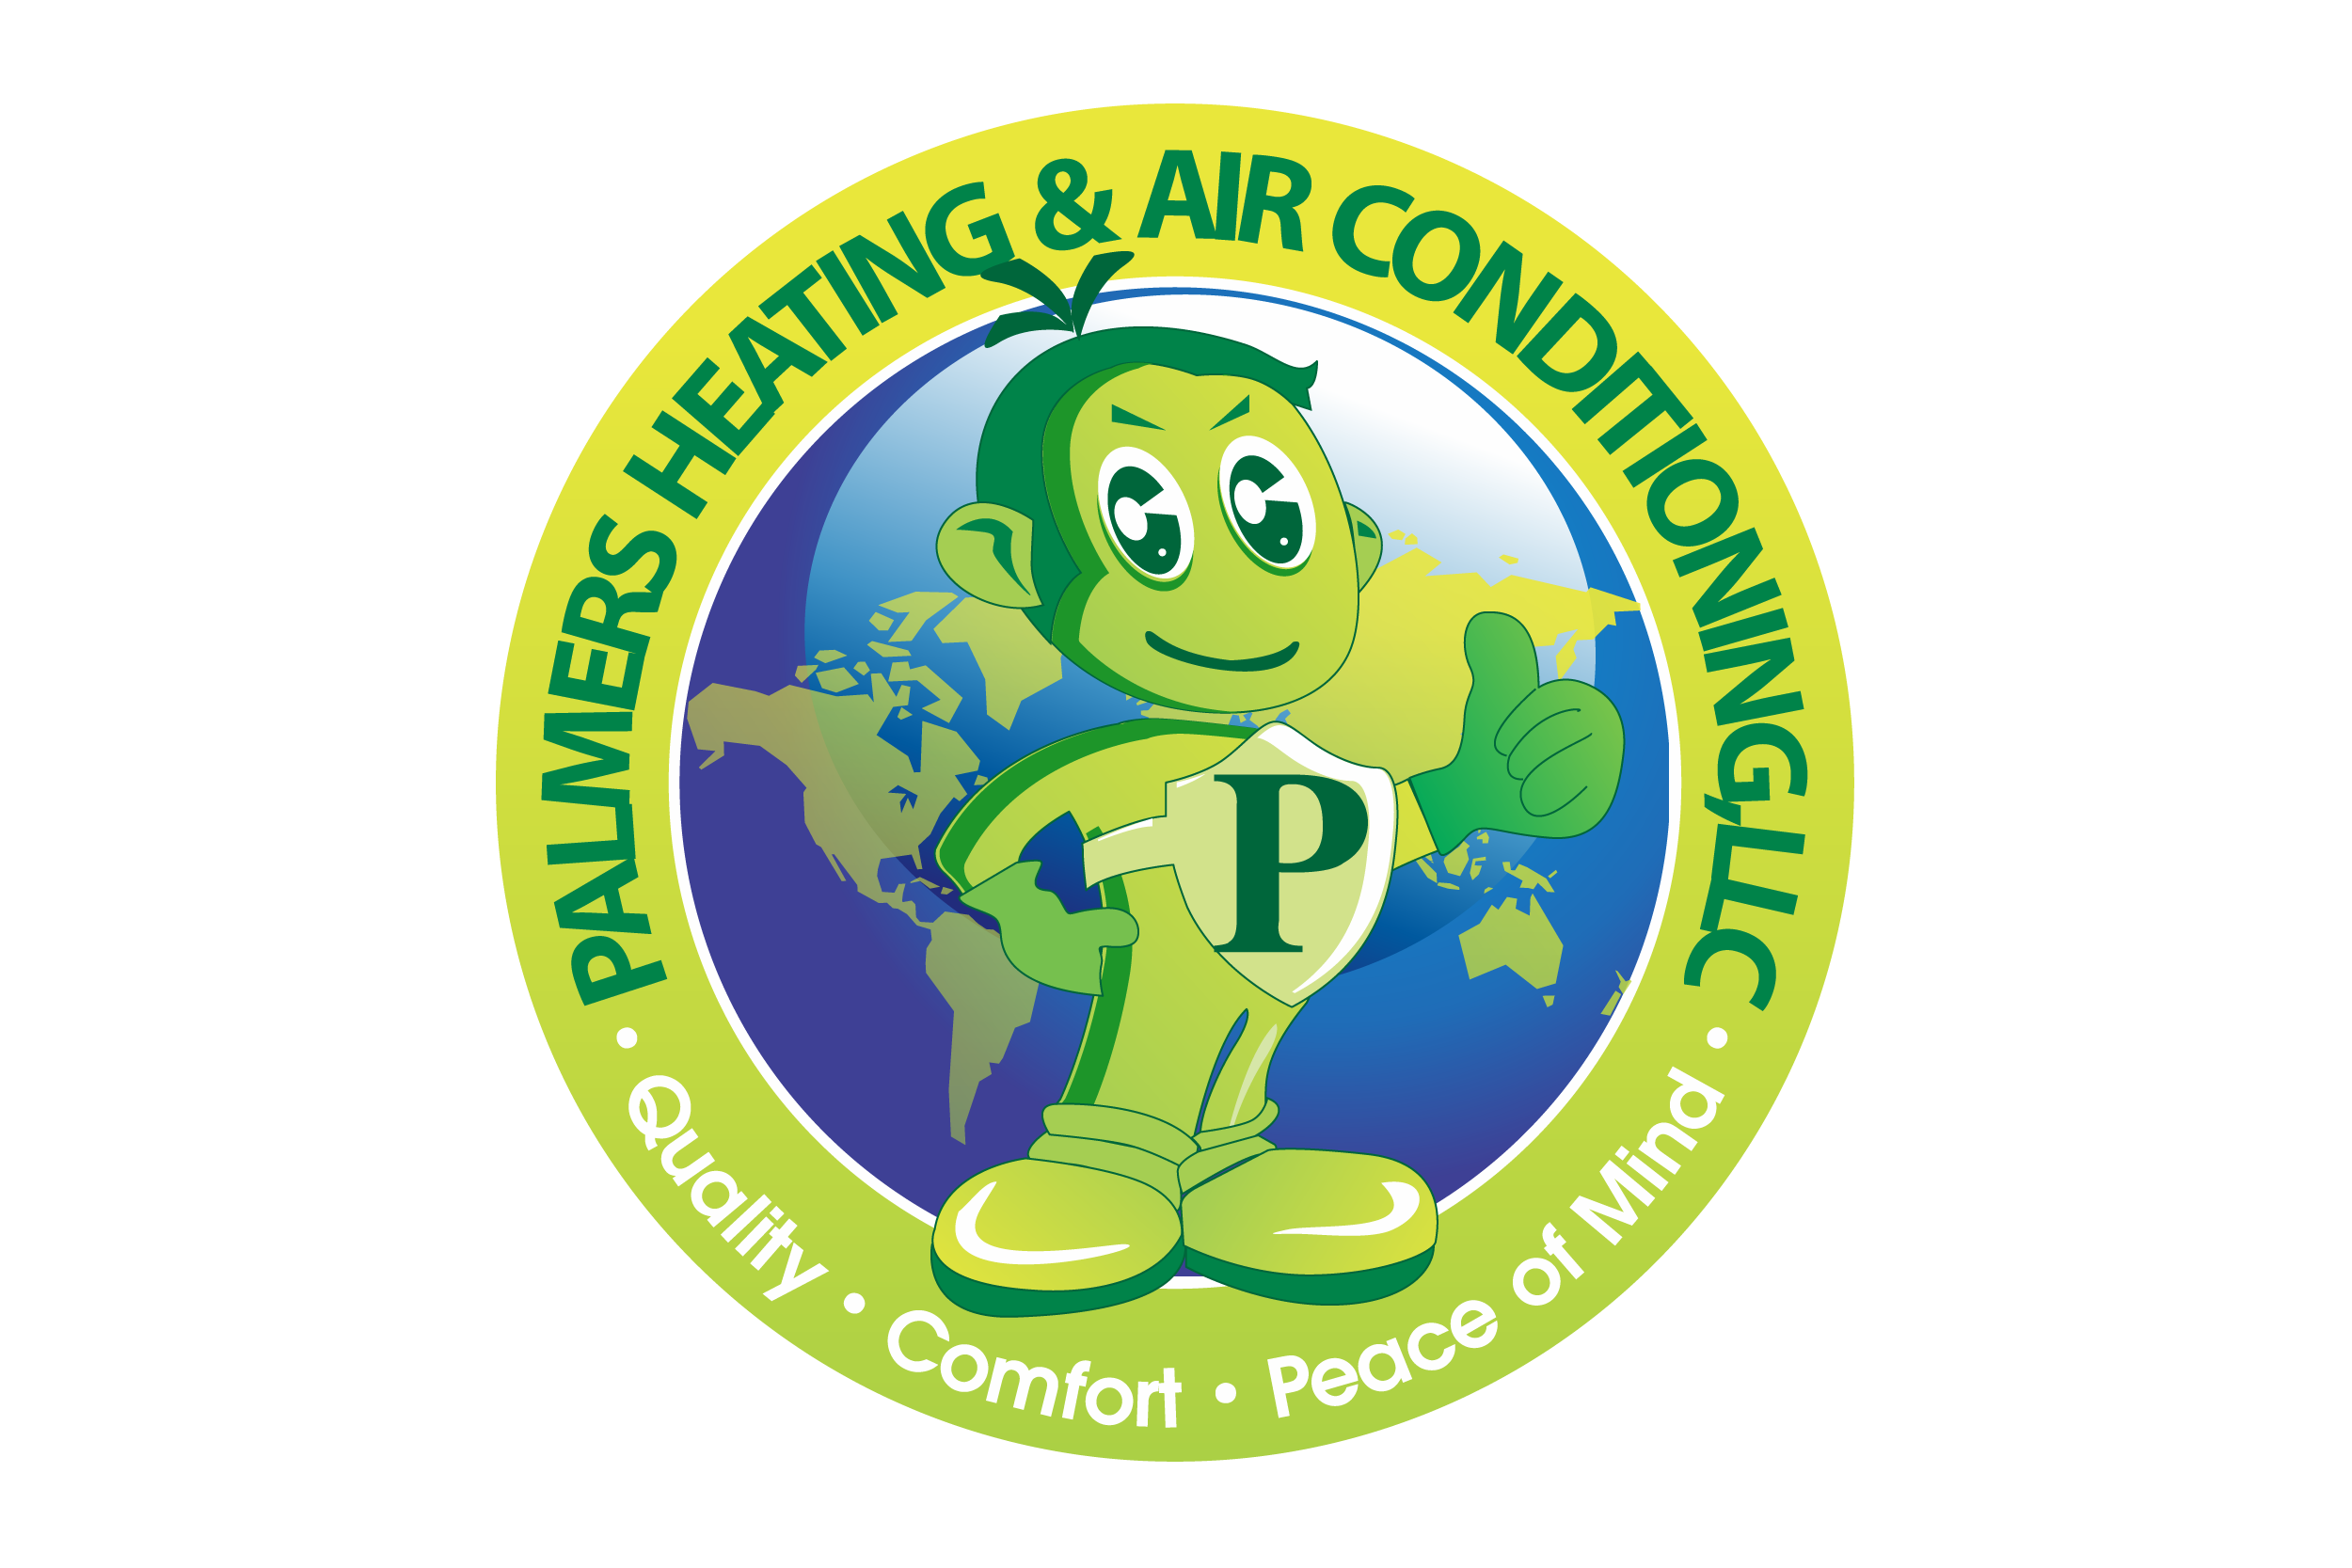 Palmers Heating & Air Conditioning